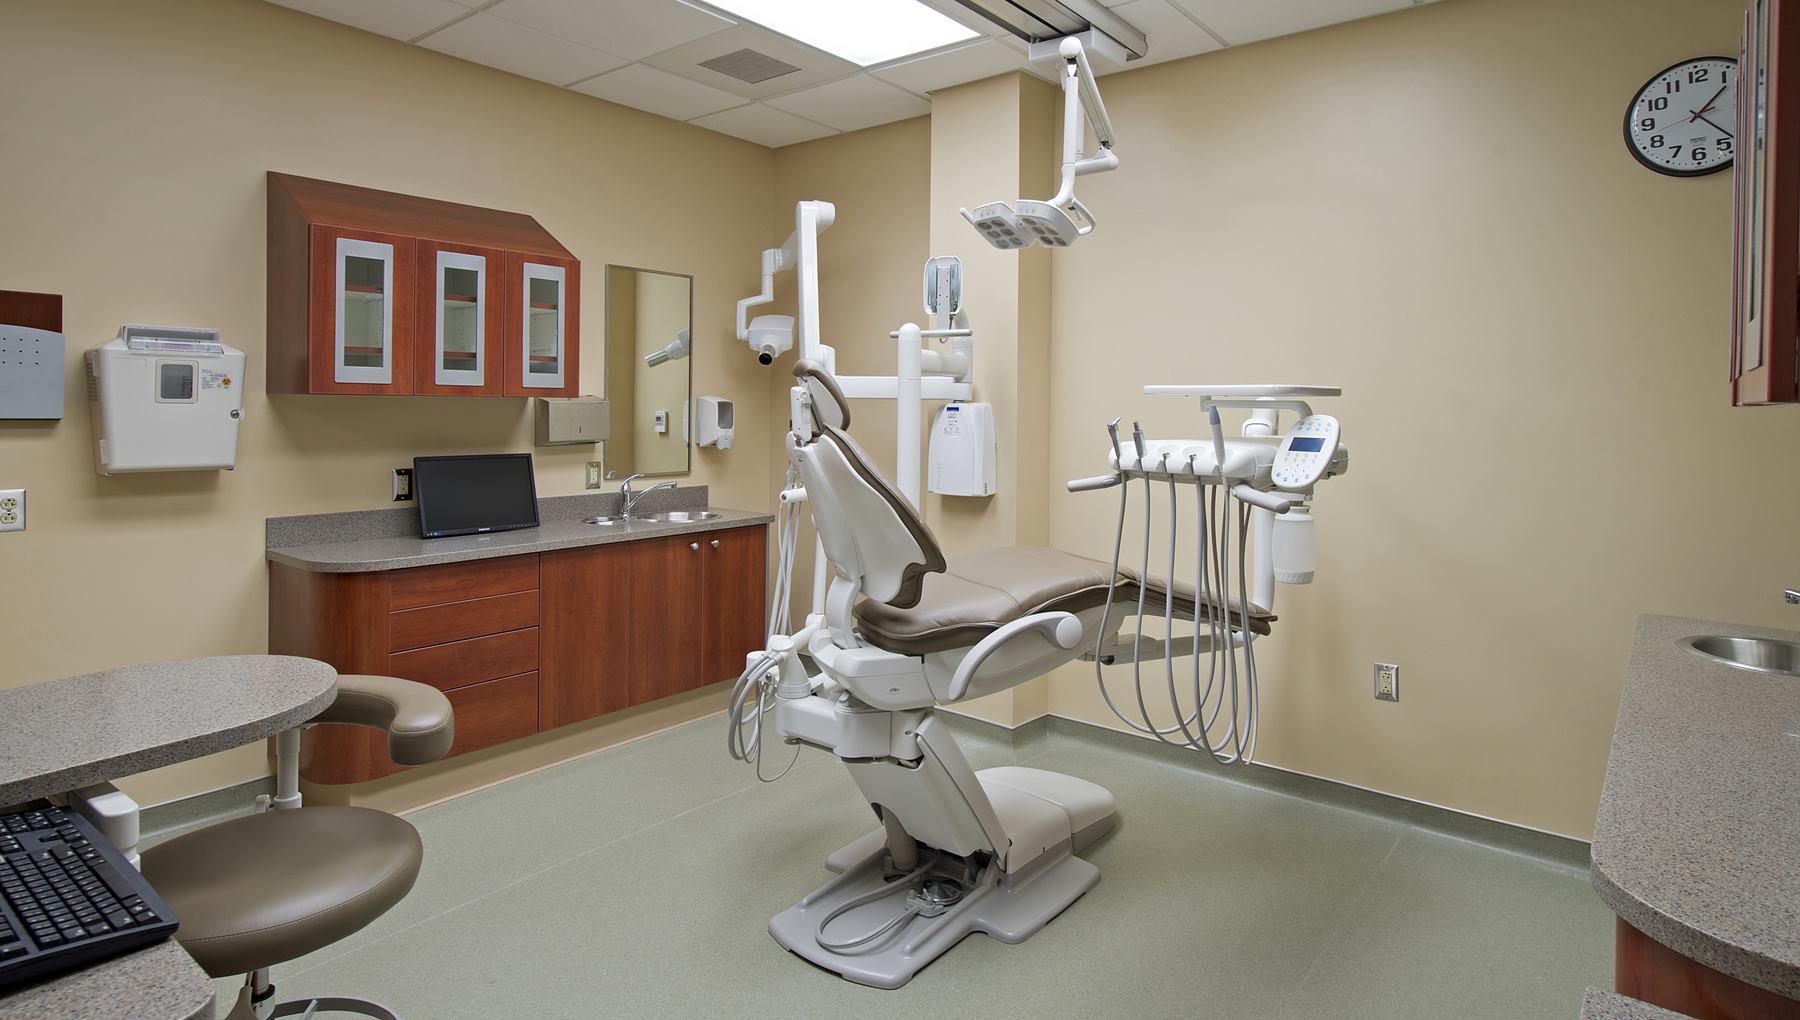 Dental chair in a patient room at Love Dental Clinic